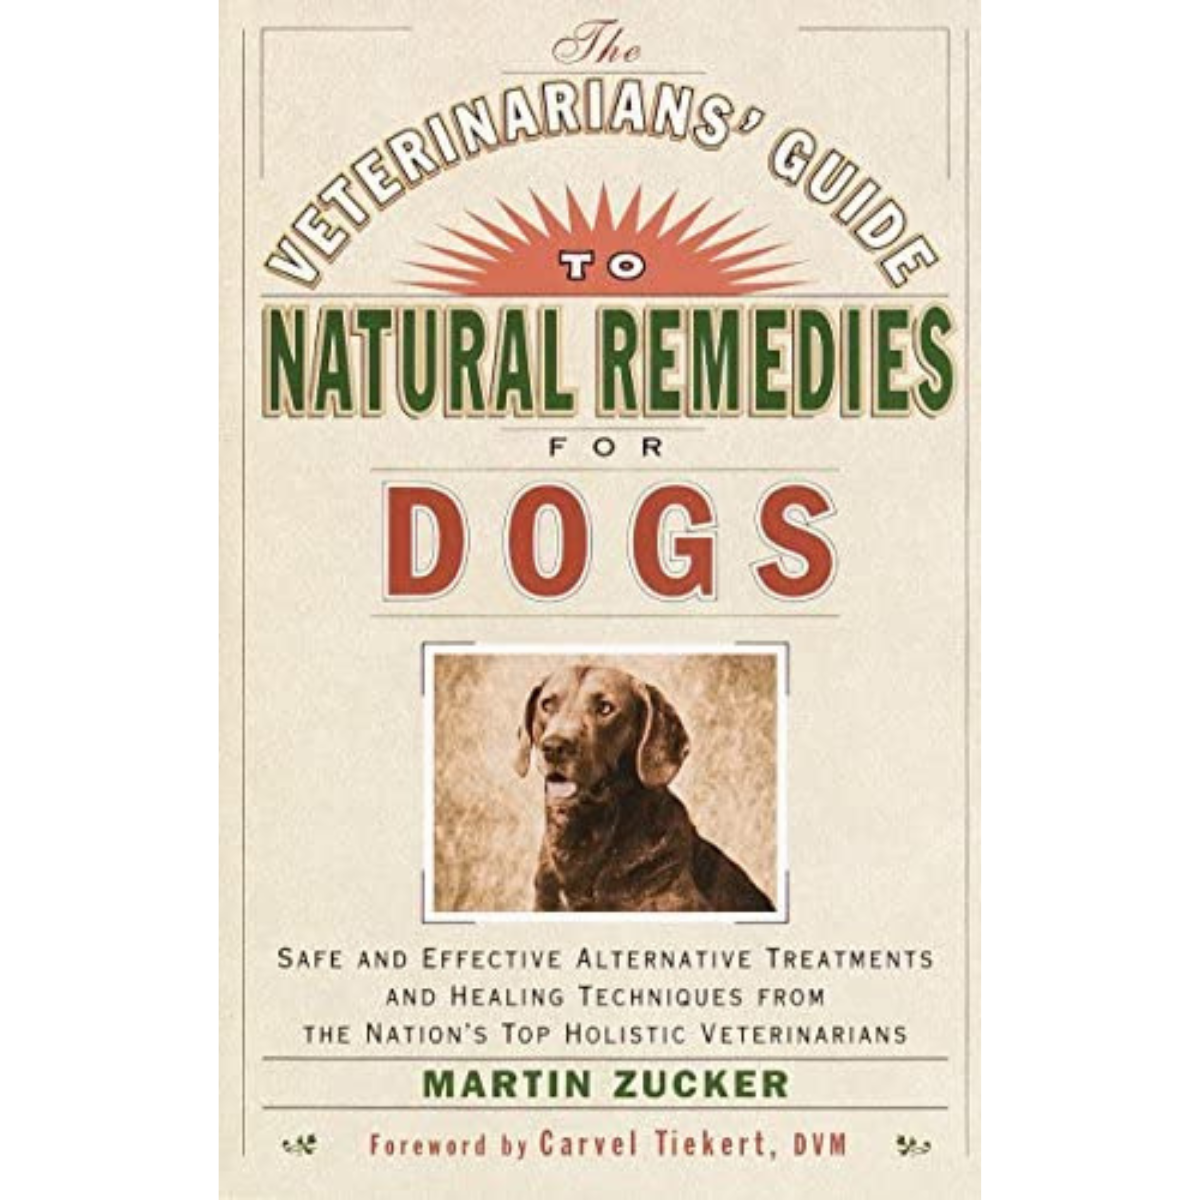 Veterinarians' Guide to Natural Remedies for Dogs, The